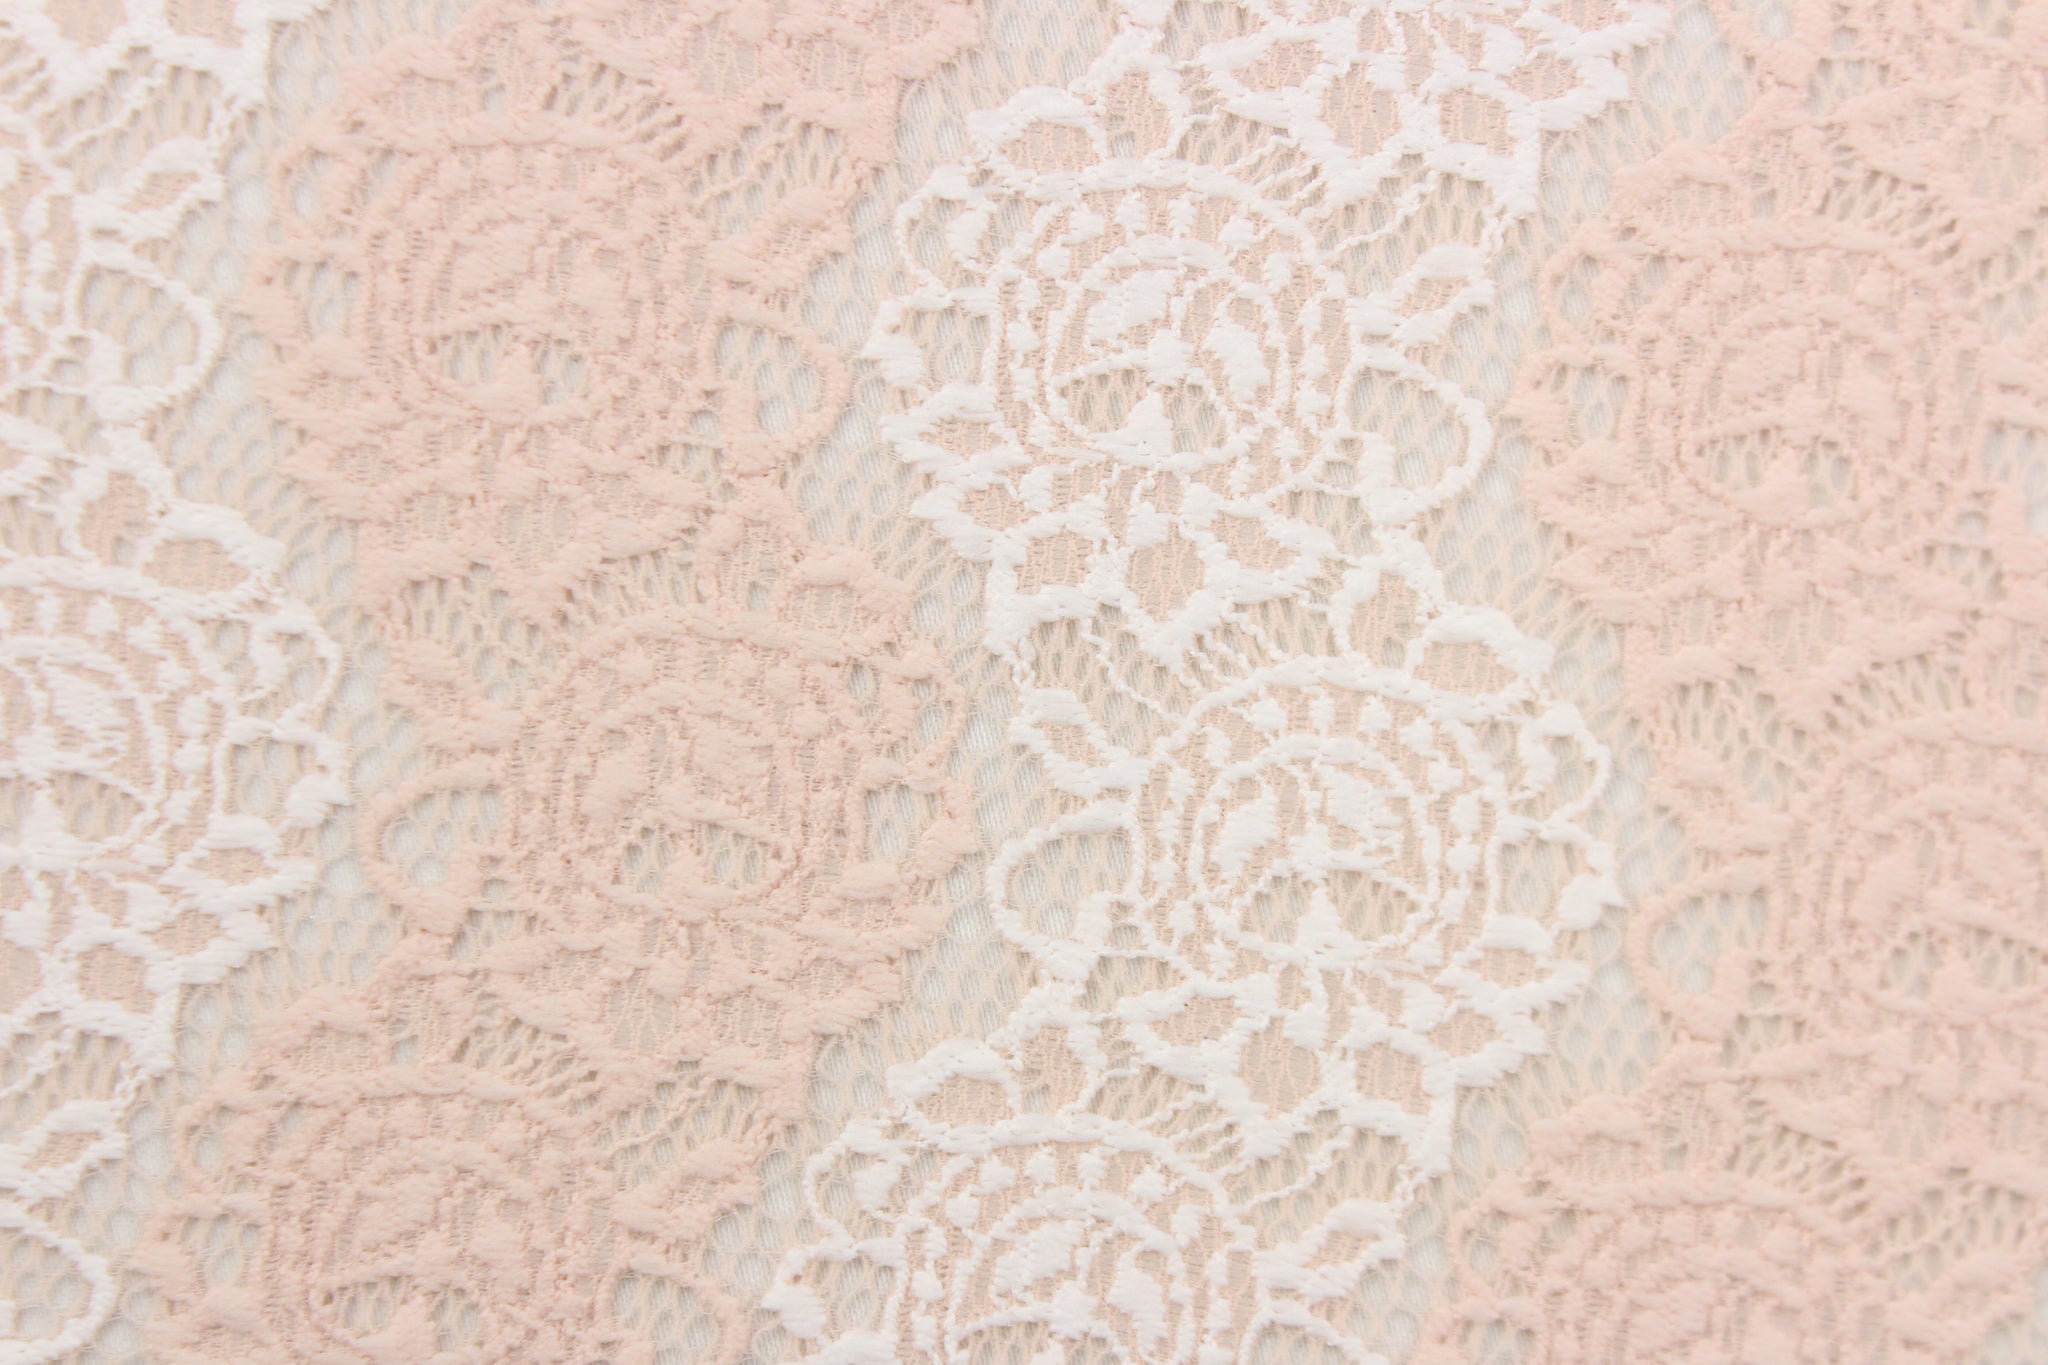 Light Teal Stretch Lace Fabric, Medallion Motif